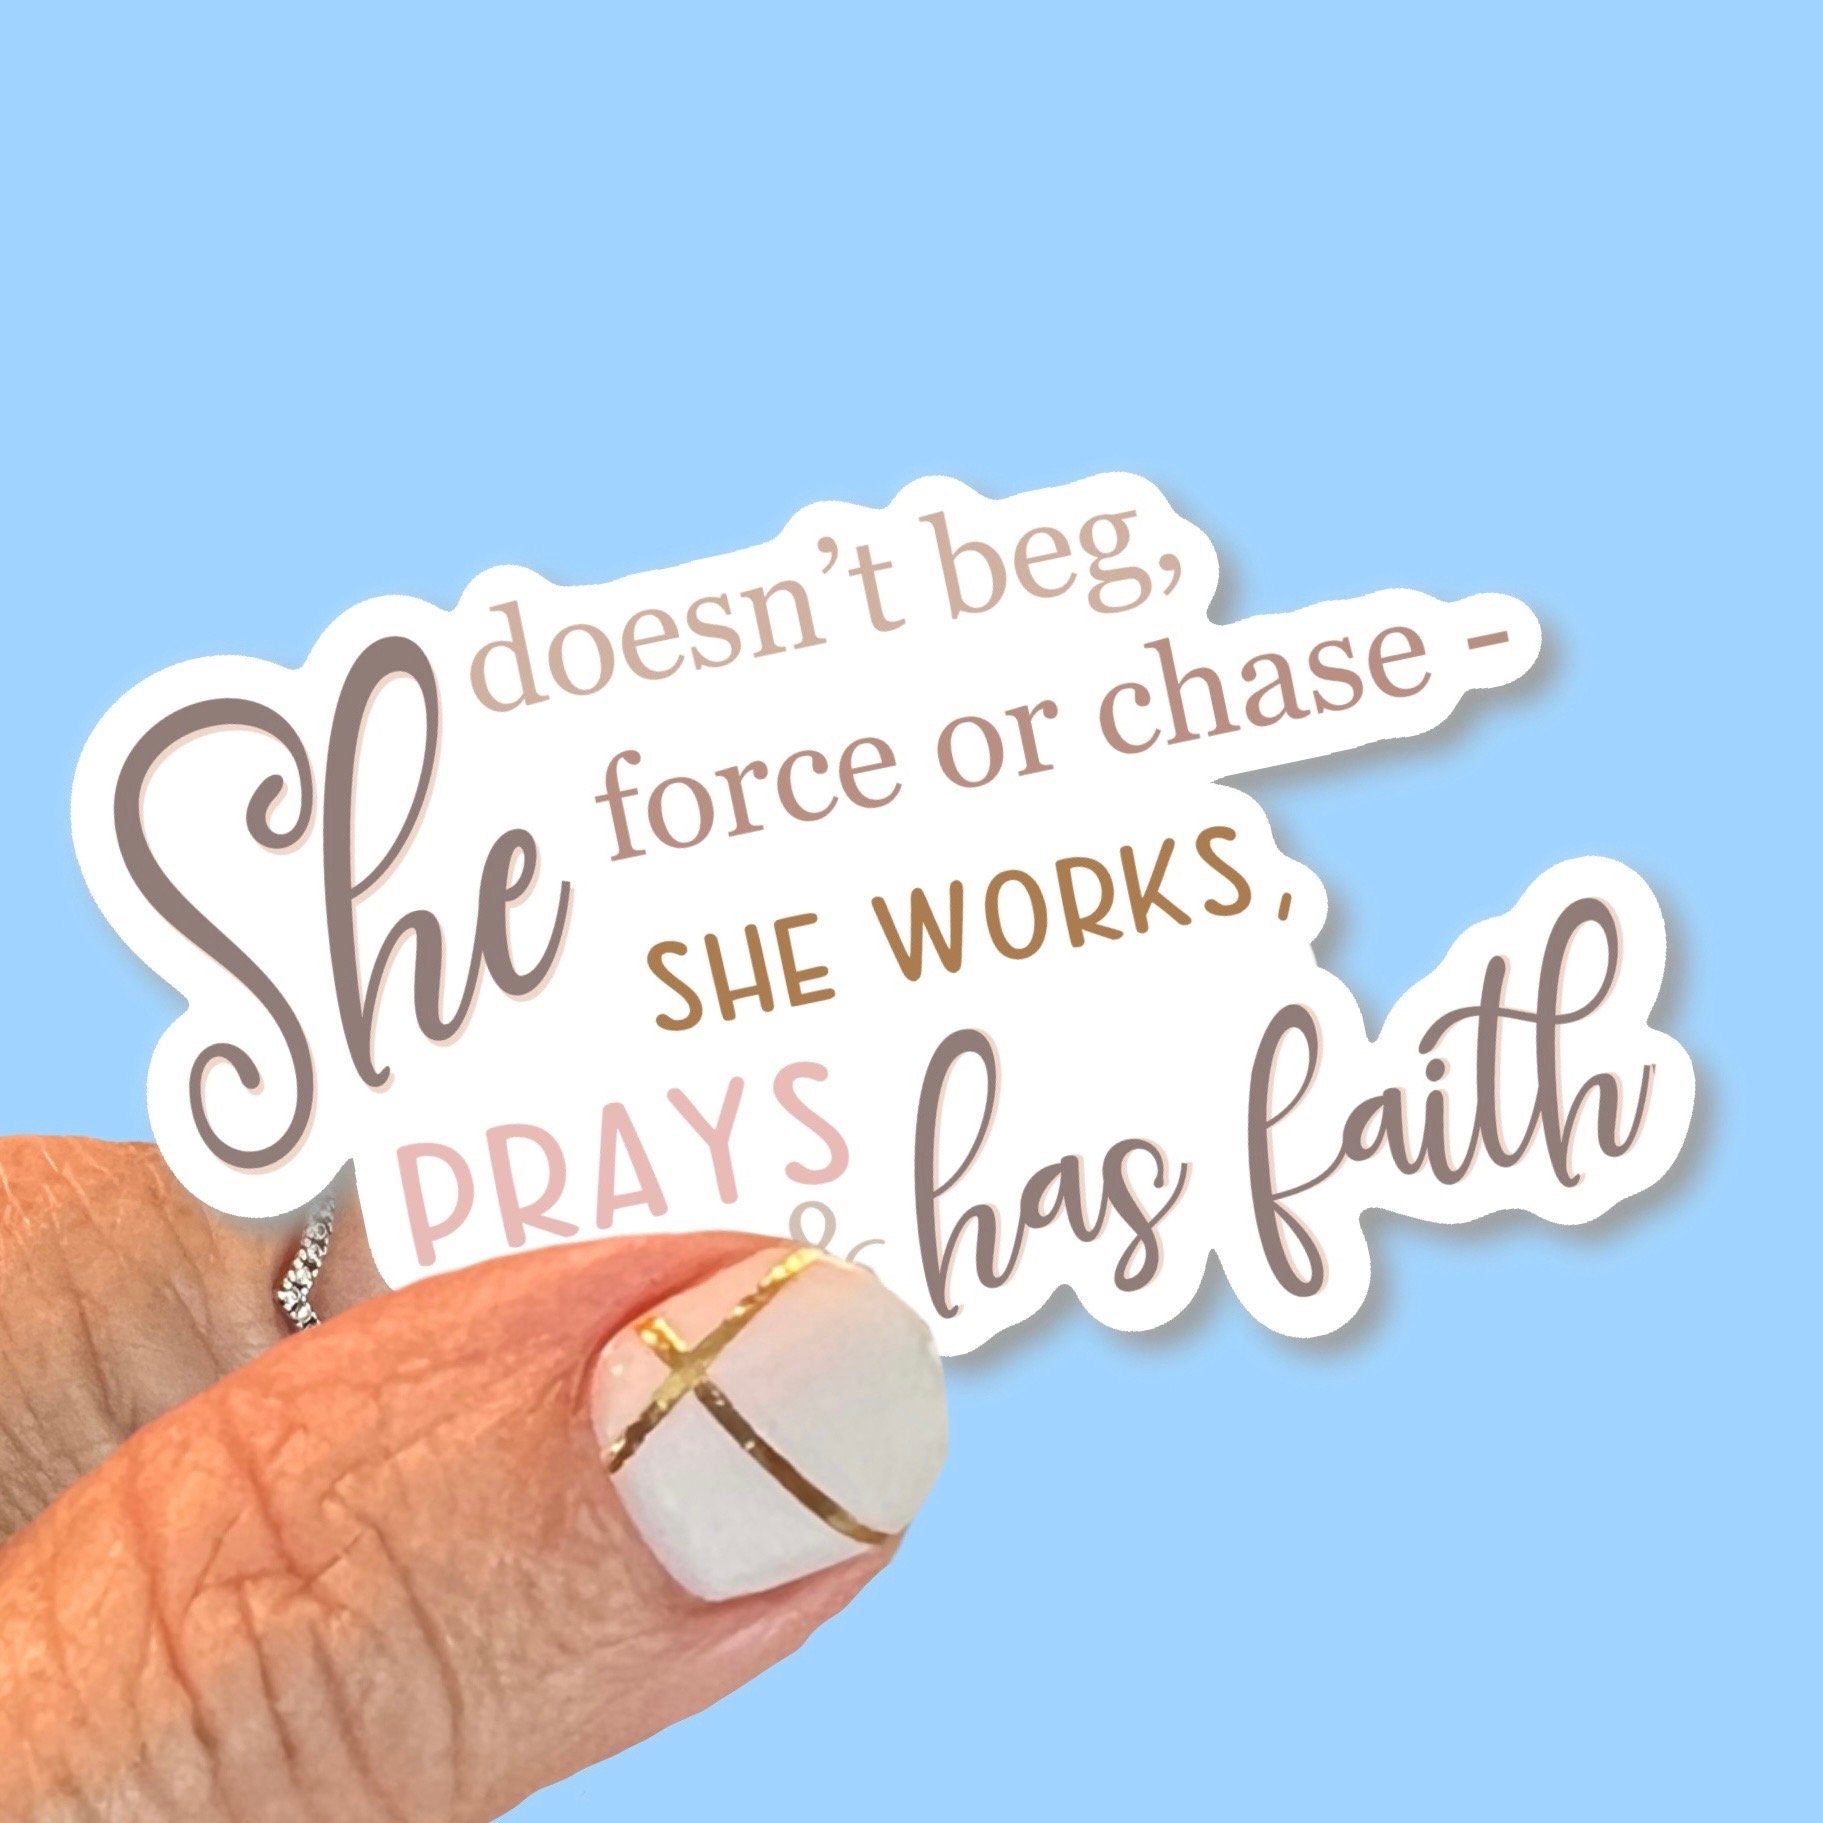 She doesn’t beg, force or chase - she works, prays and has faith - Christian Faith UV/ Waterproof Vinyl Sticker/ Decal- Choice of Size